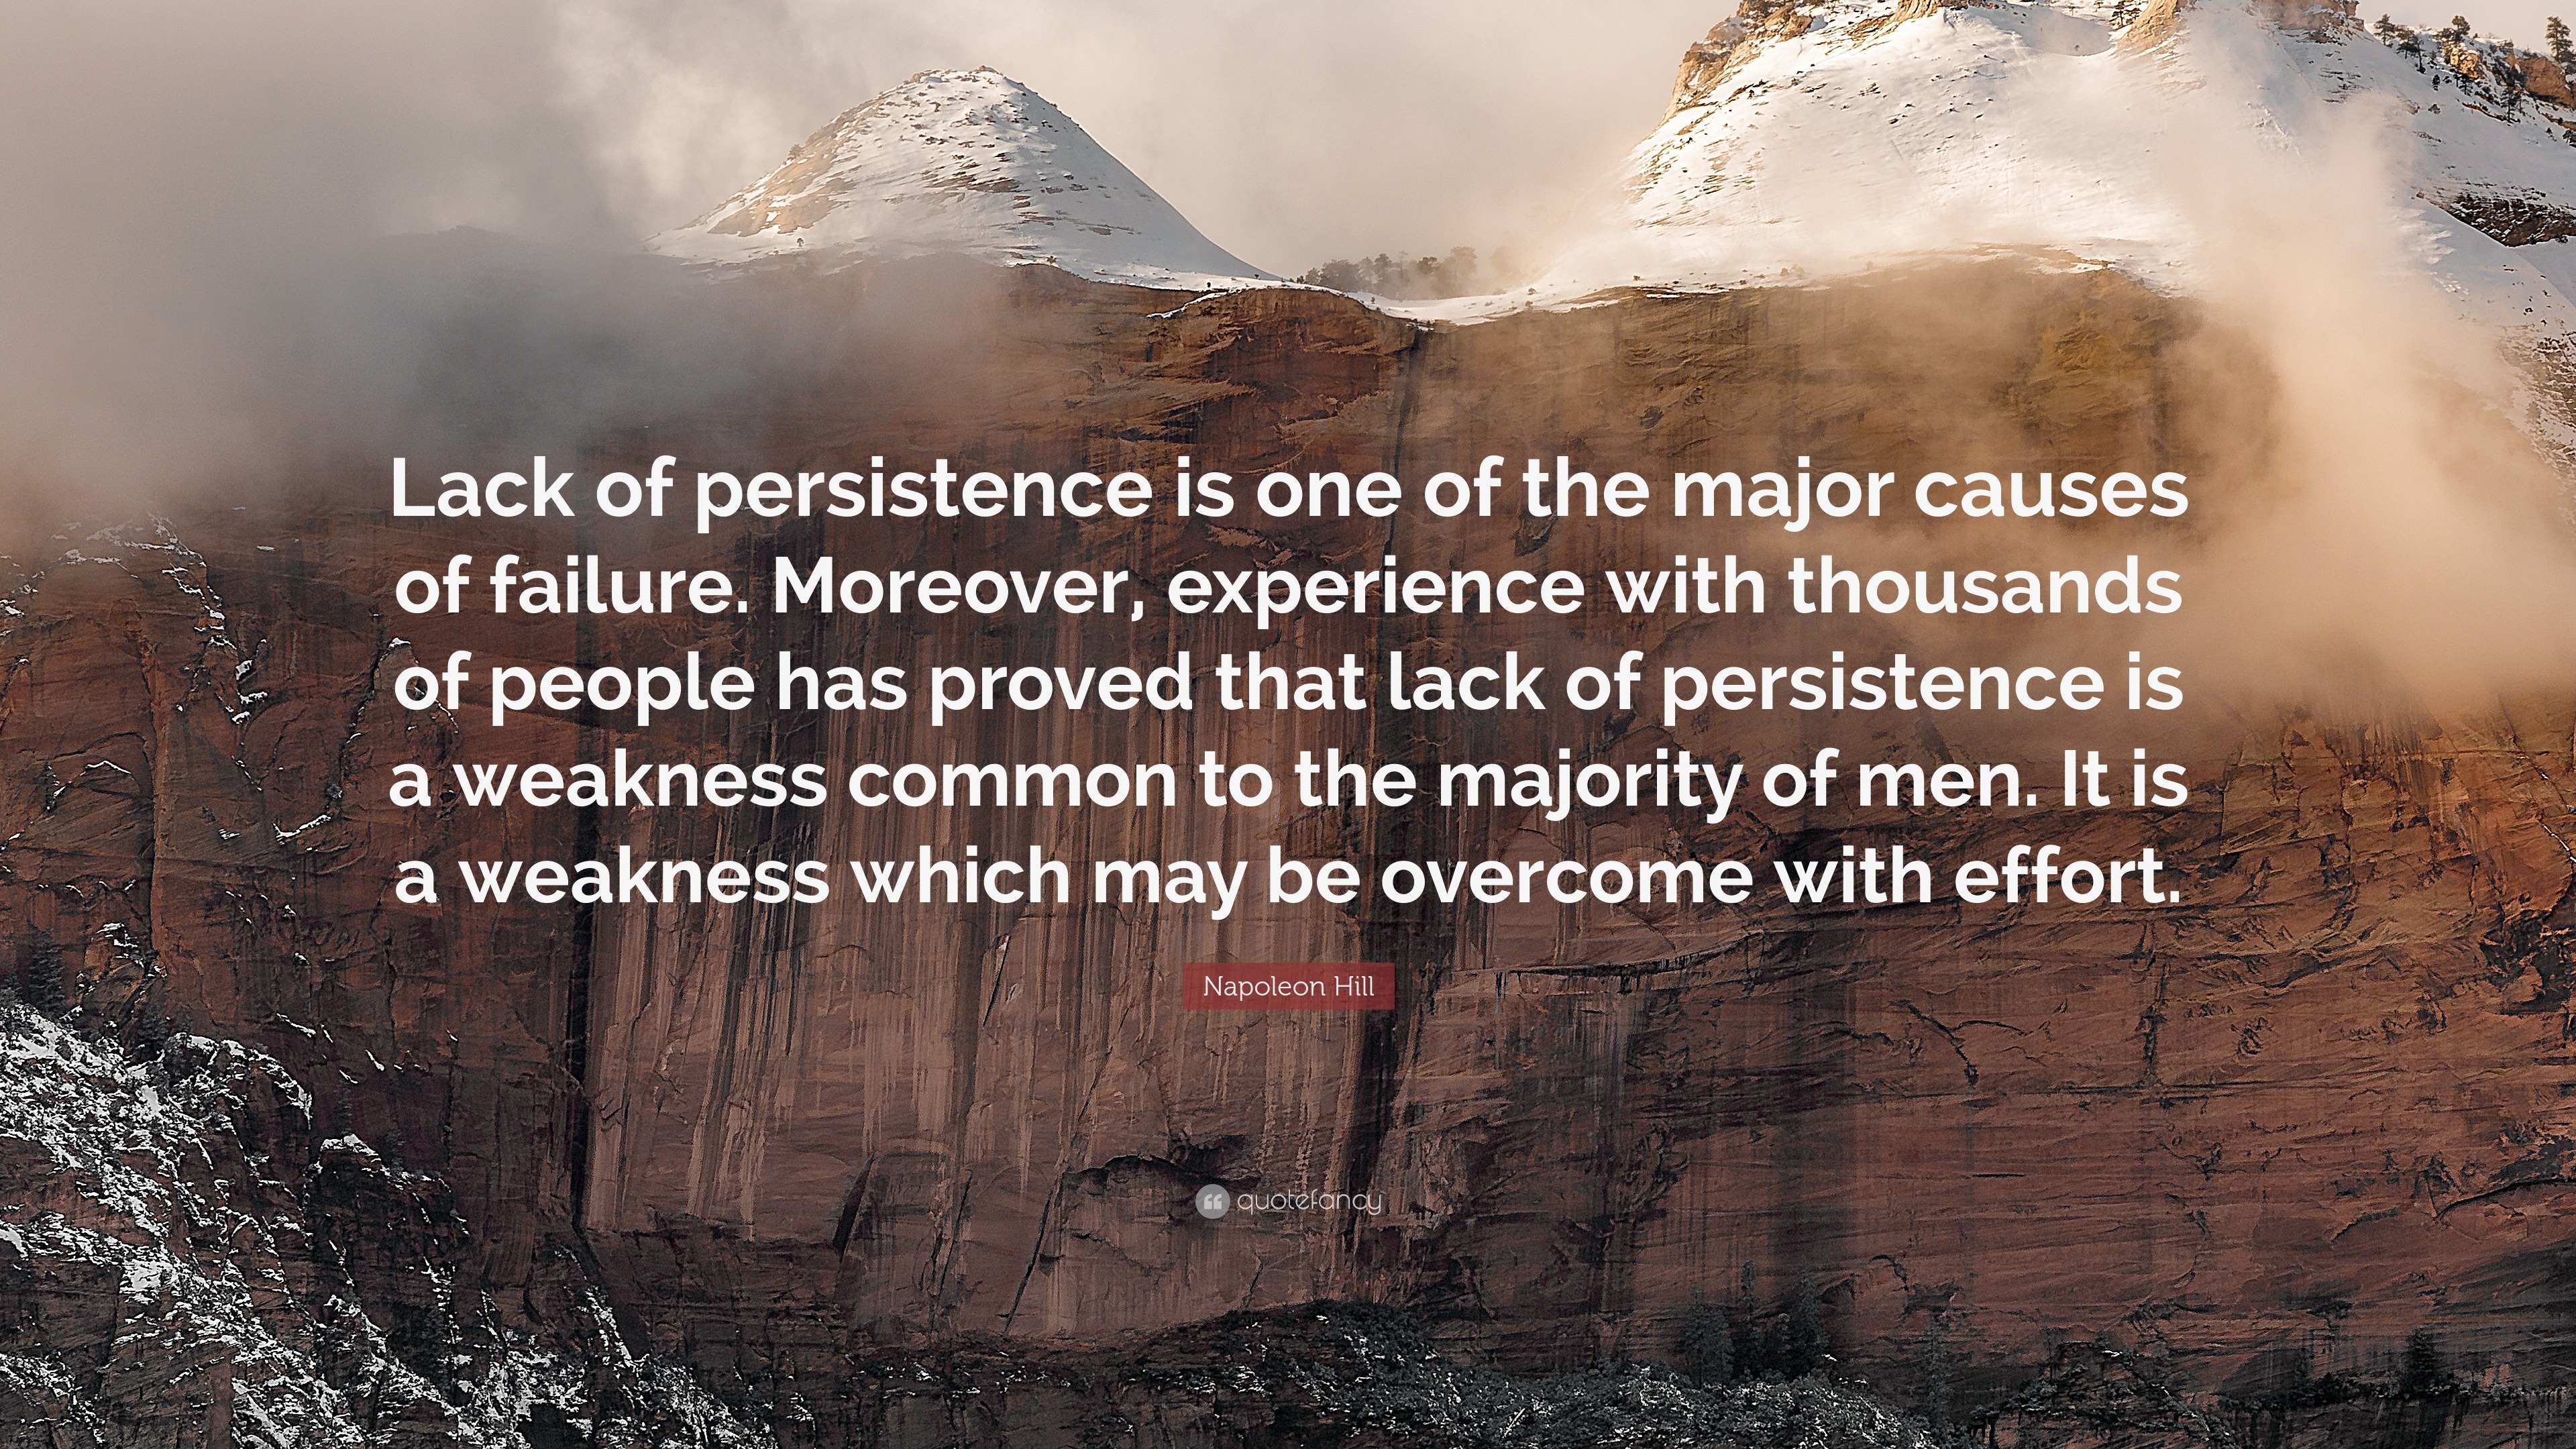 Napoleon Hill Quote: “Lack of persistence is one of the major causes of ...